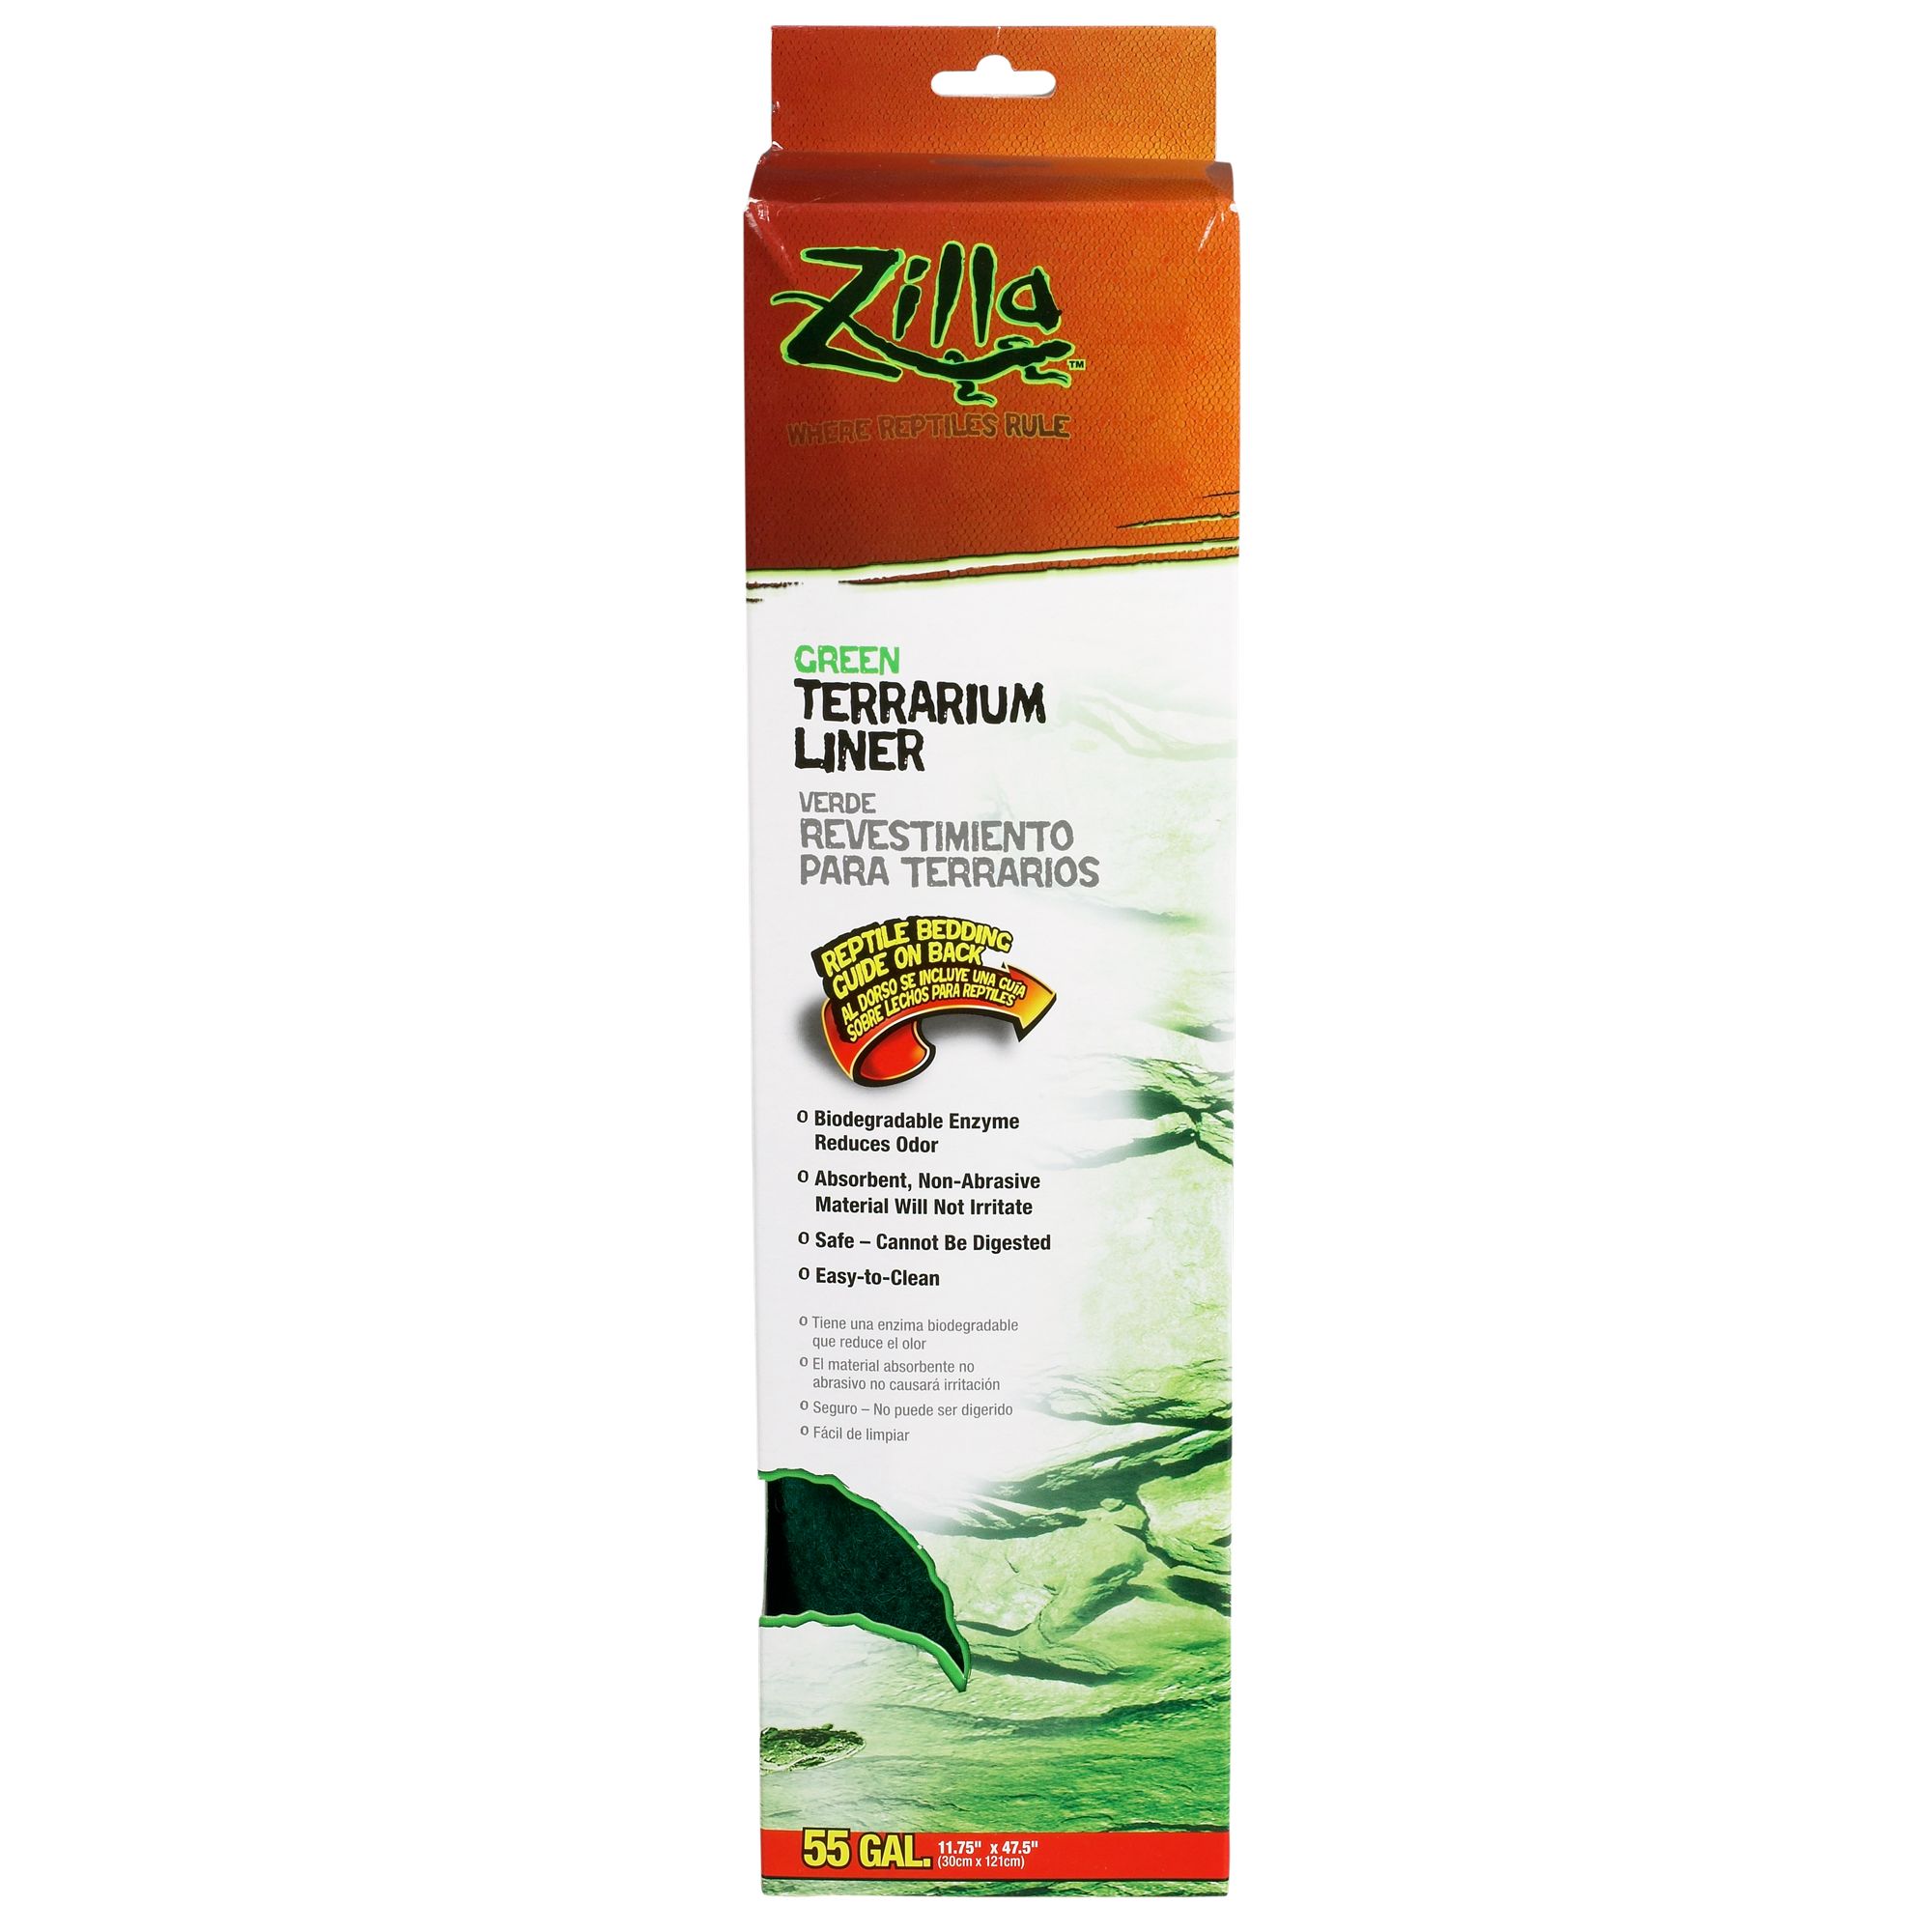 Zilla Reptile Terrarium Bedding Substrate Liner Green 10G 2 Pack 